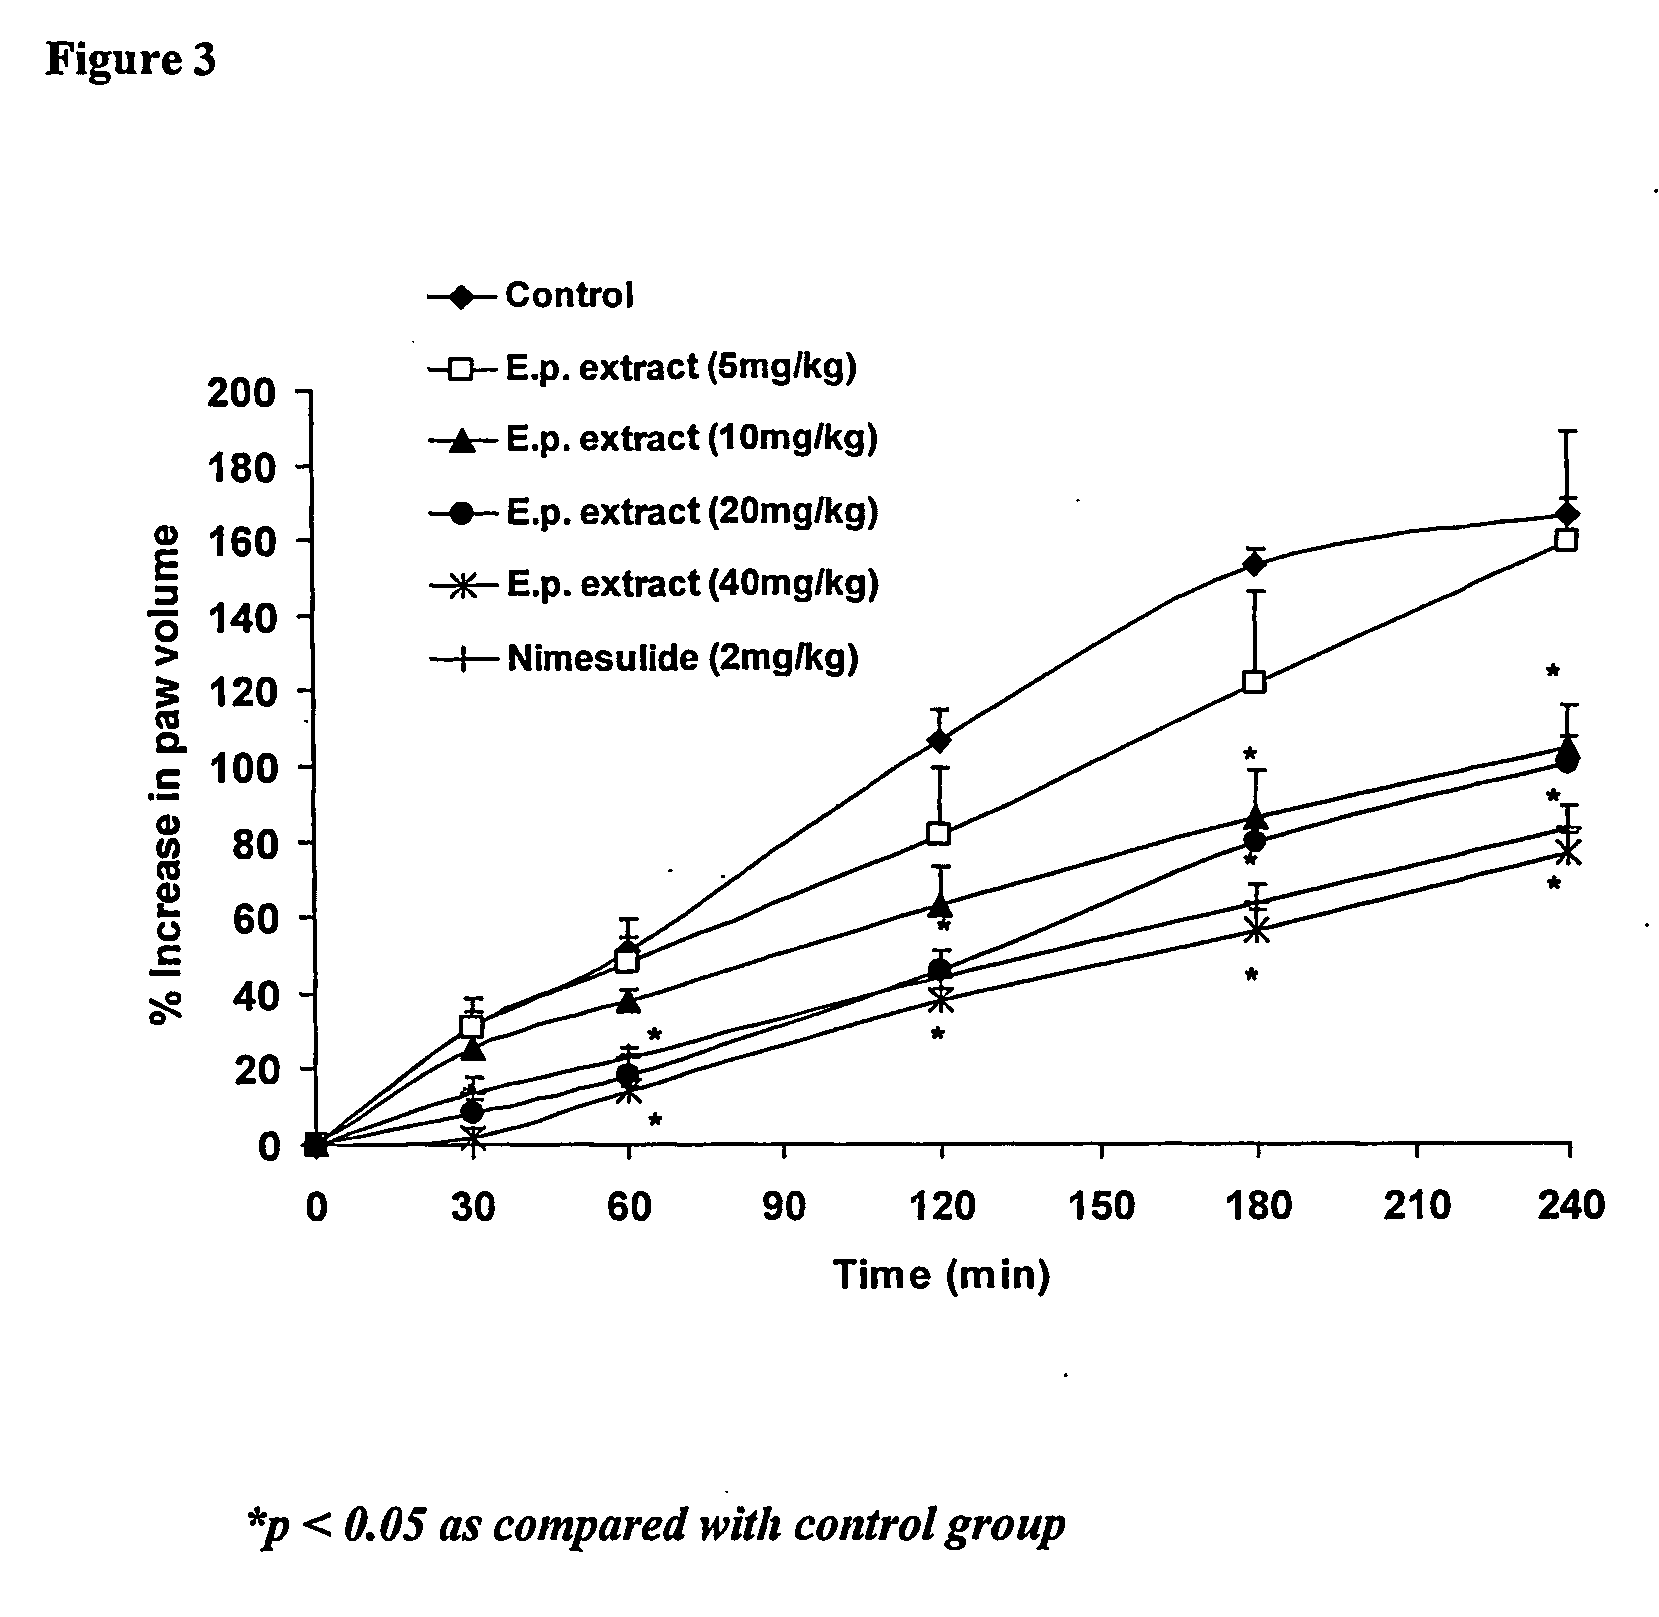 Pharmaceutical compositions comprising an extract of euphorbia prostrata